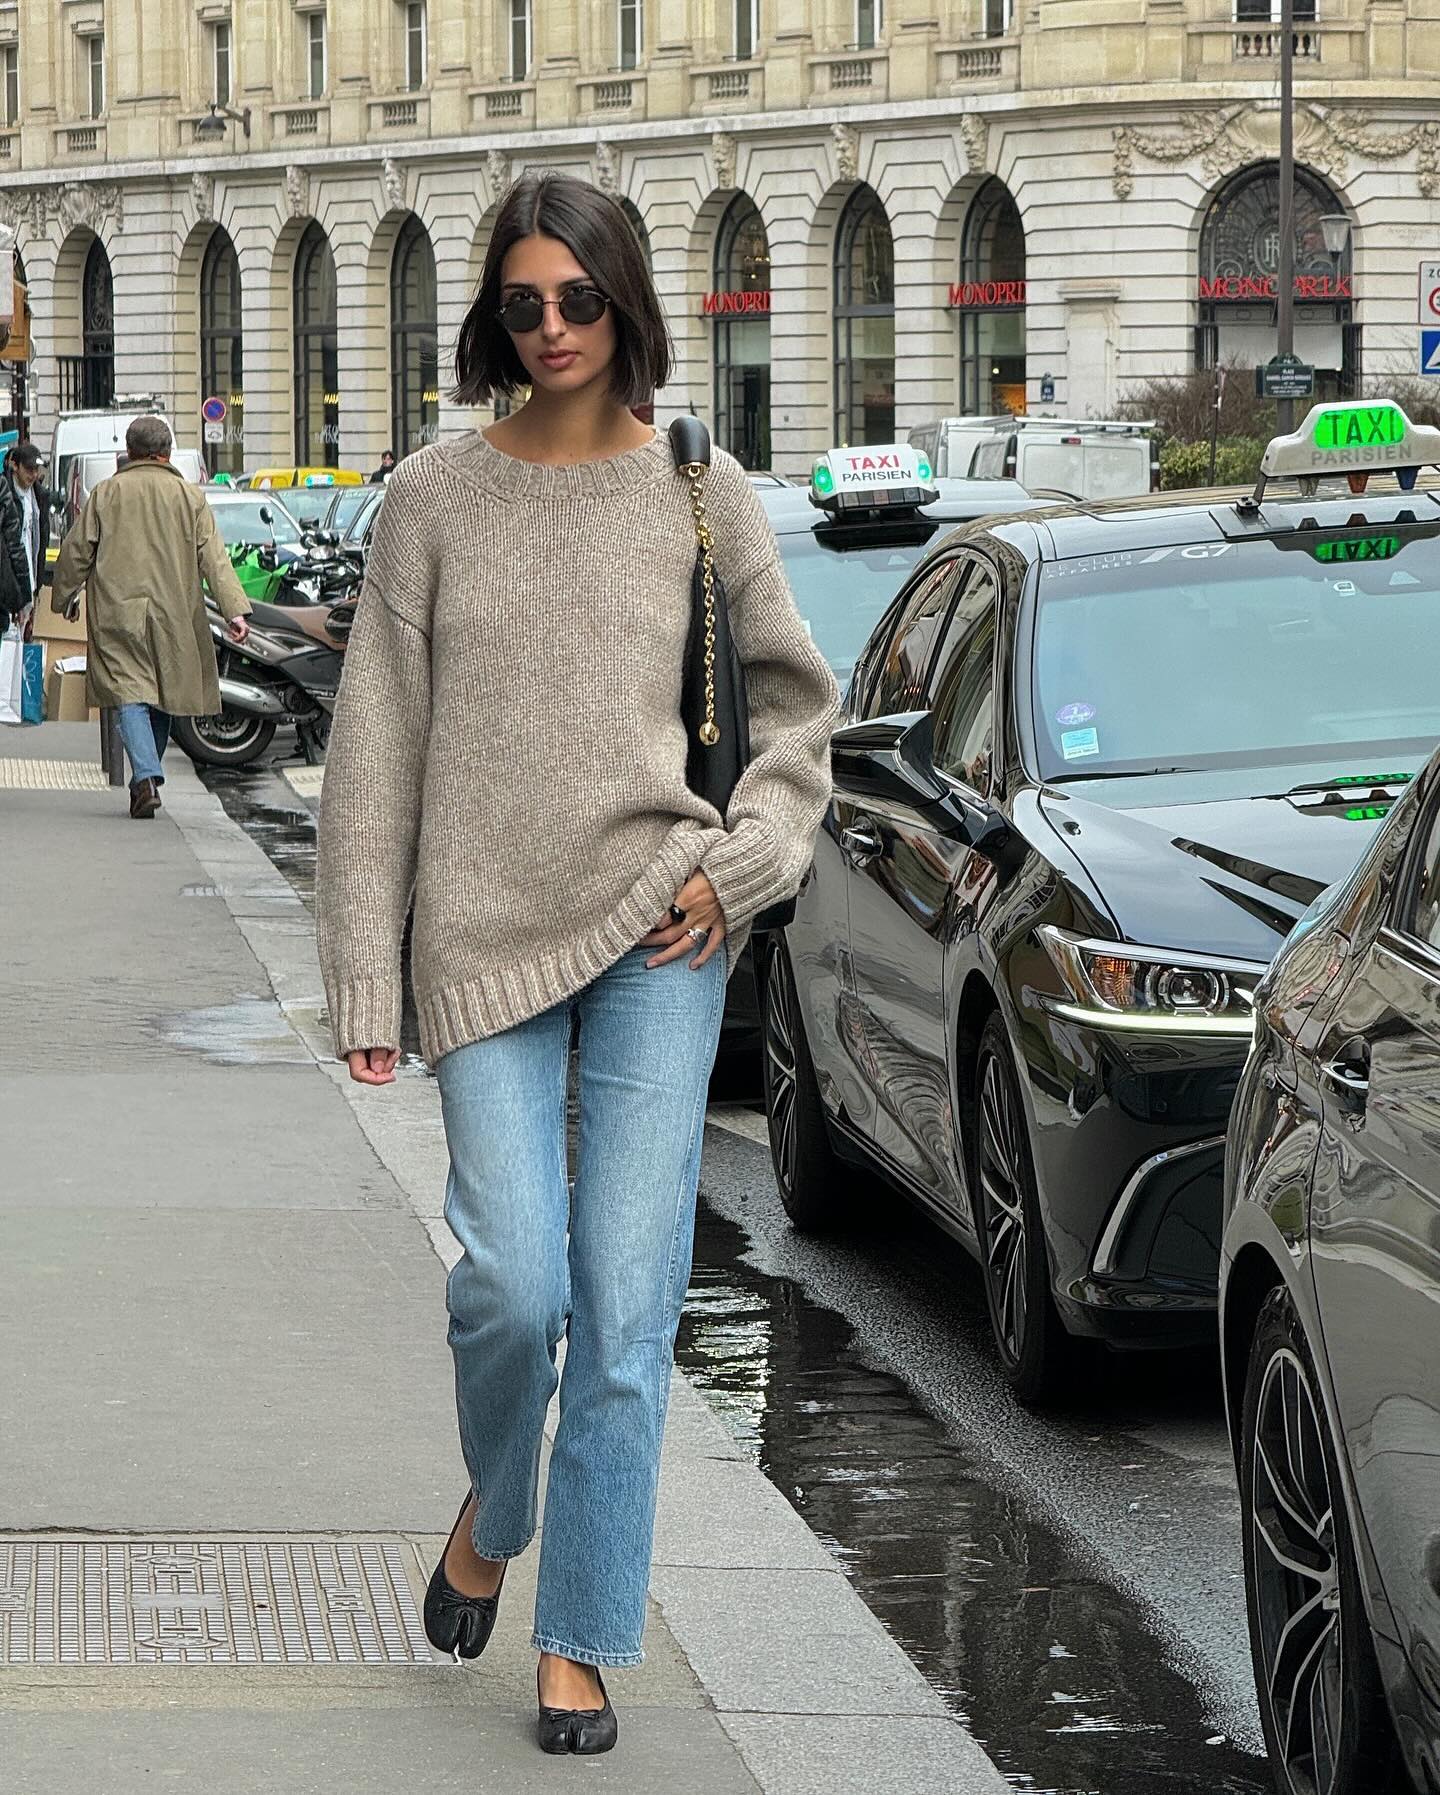 stylish French woman with a bob haircut walking on the sidewalk in Paris wearing an oversized neutral sweater, straight-leg jeans, and black Margiela Tabi ballet flats